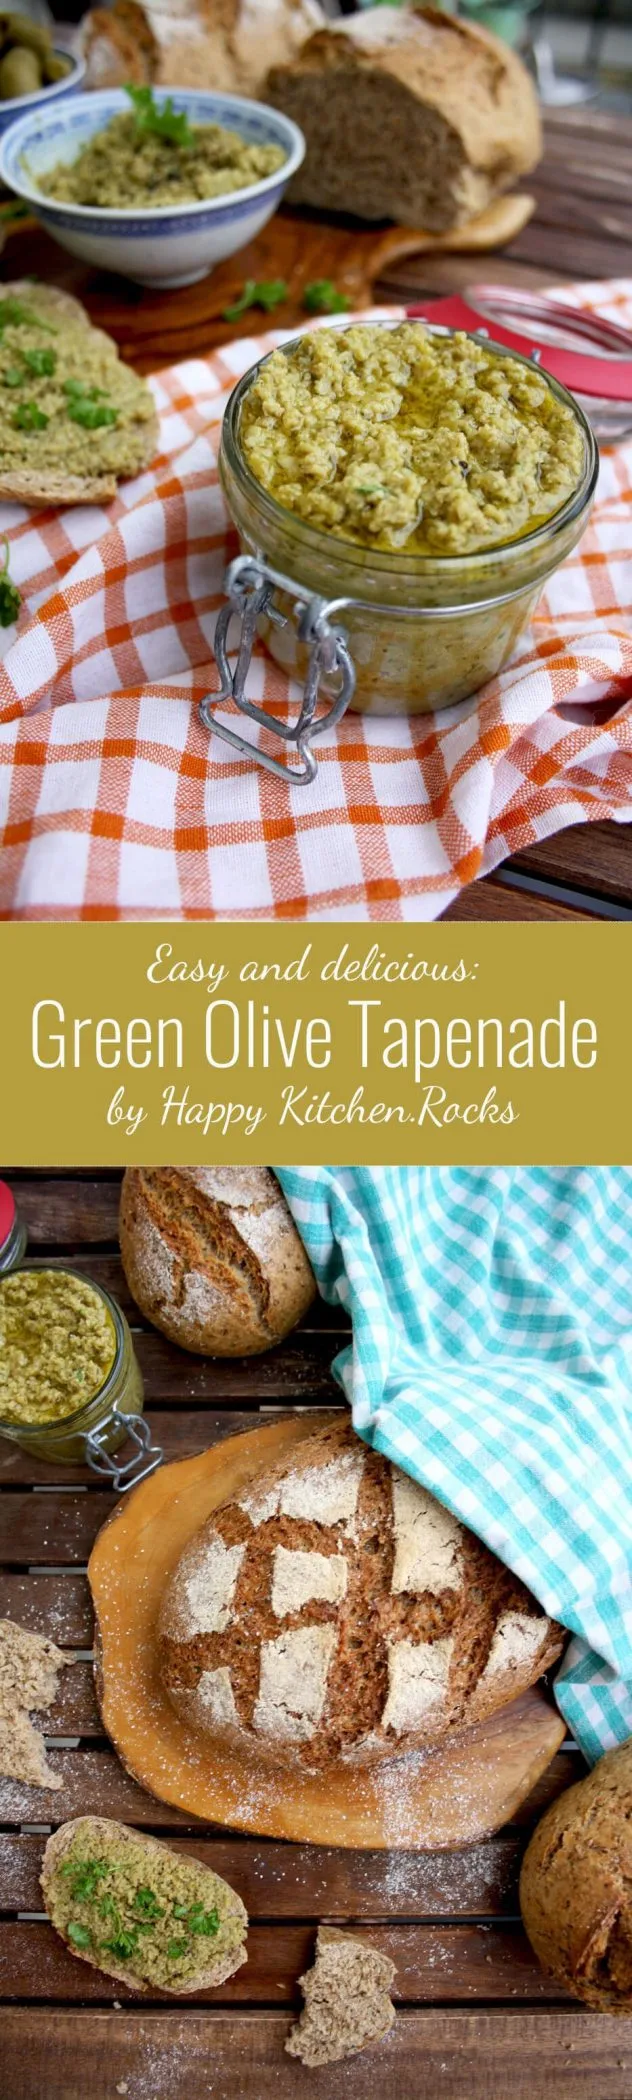 Easy, healthy and delicious Mediterranean green olive tapenade makes an amazing bread spread and vegetable dip. 10-minute vegan recipe.